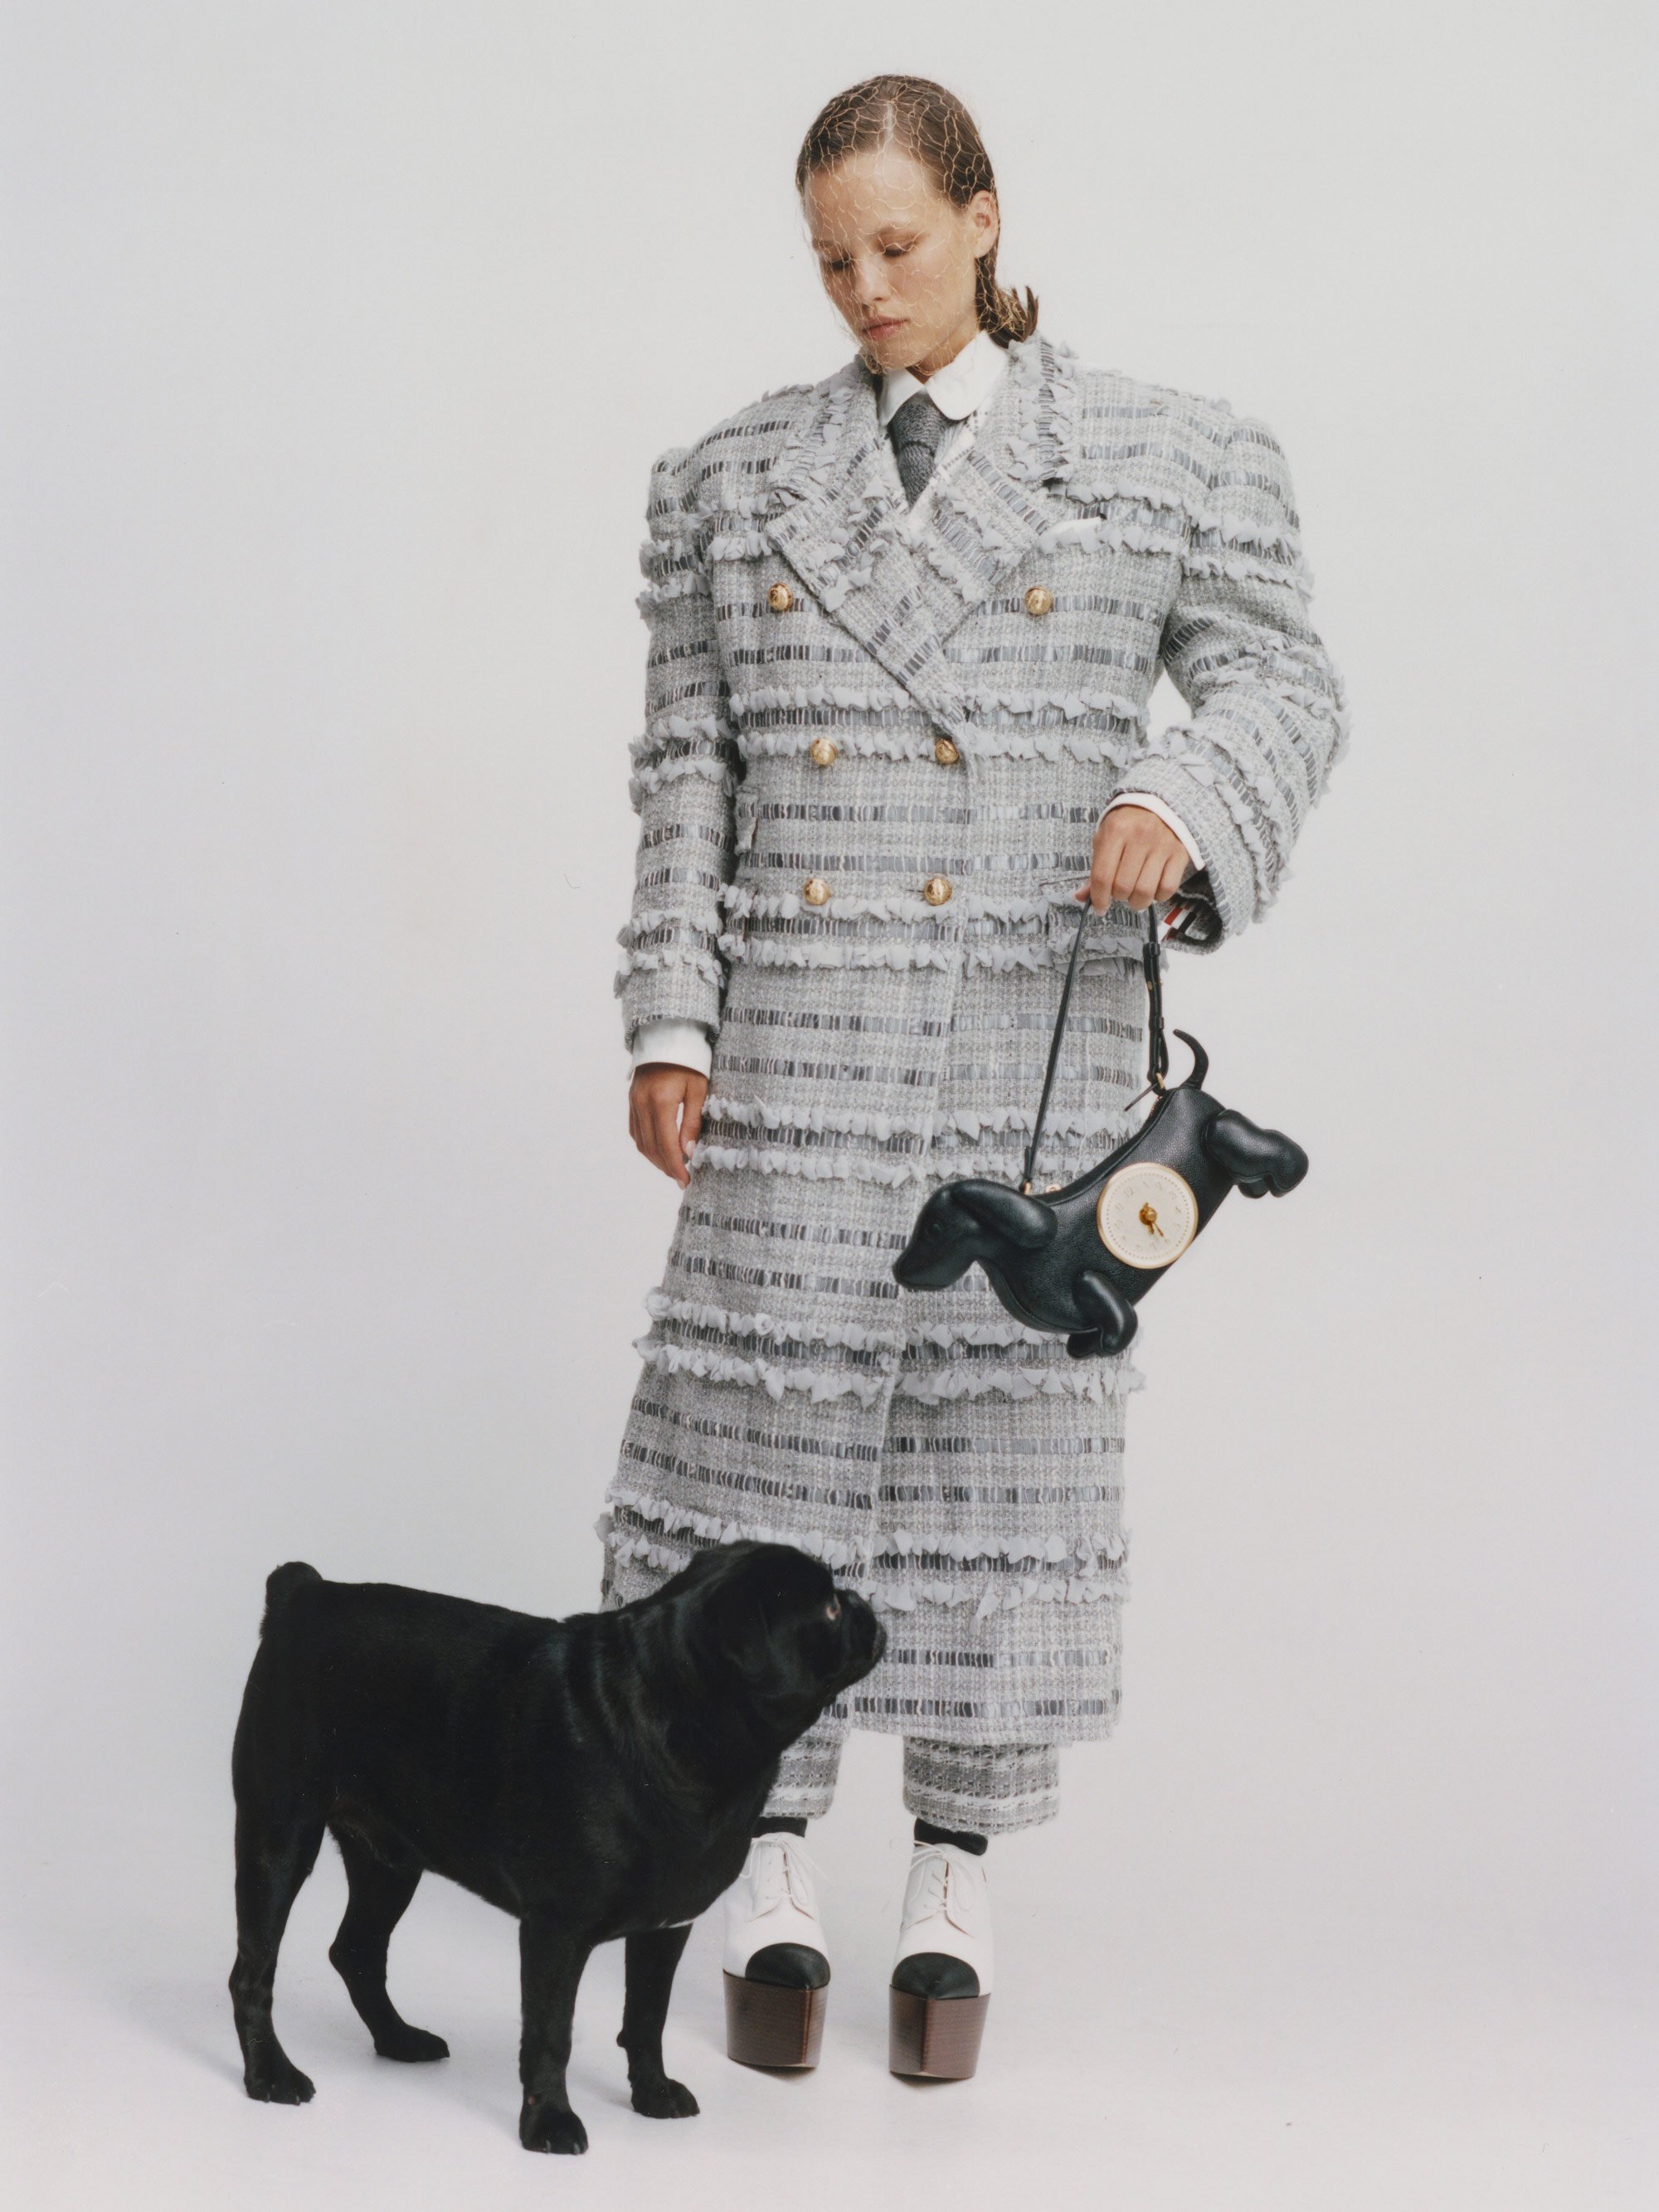 006_JACQHARRIET_PASSERBY_EXTRA_THOMBROWNE.jpg